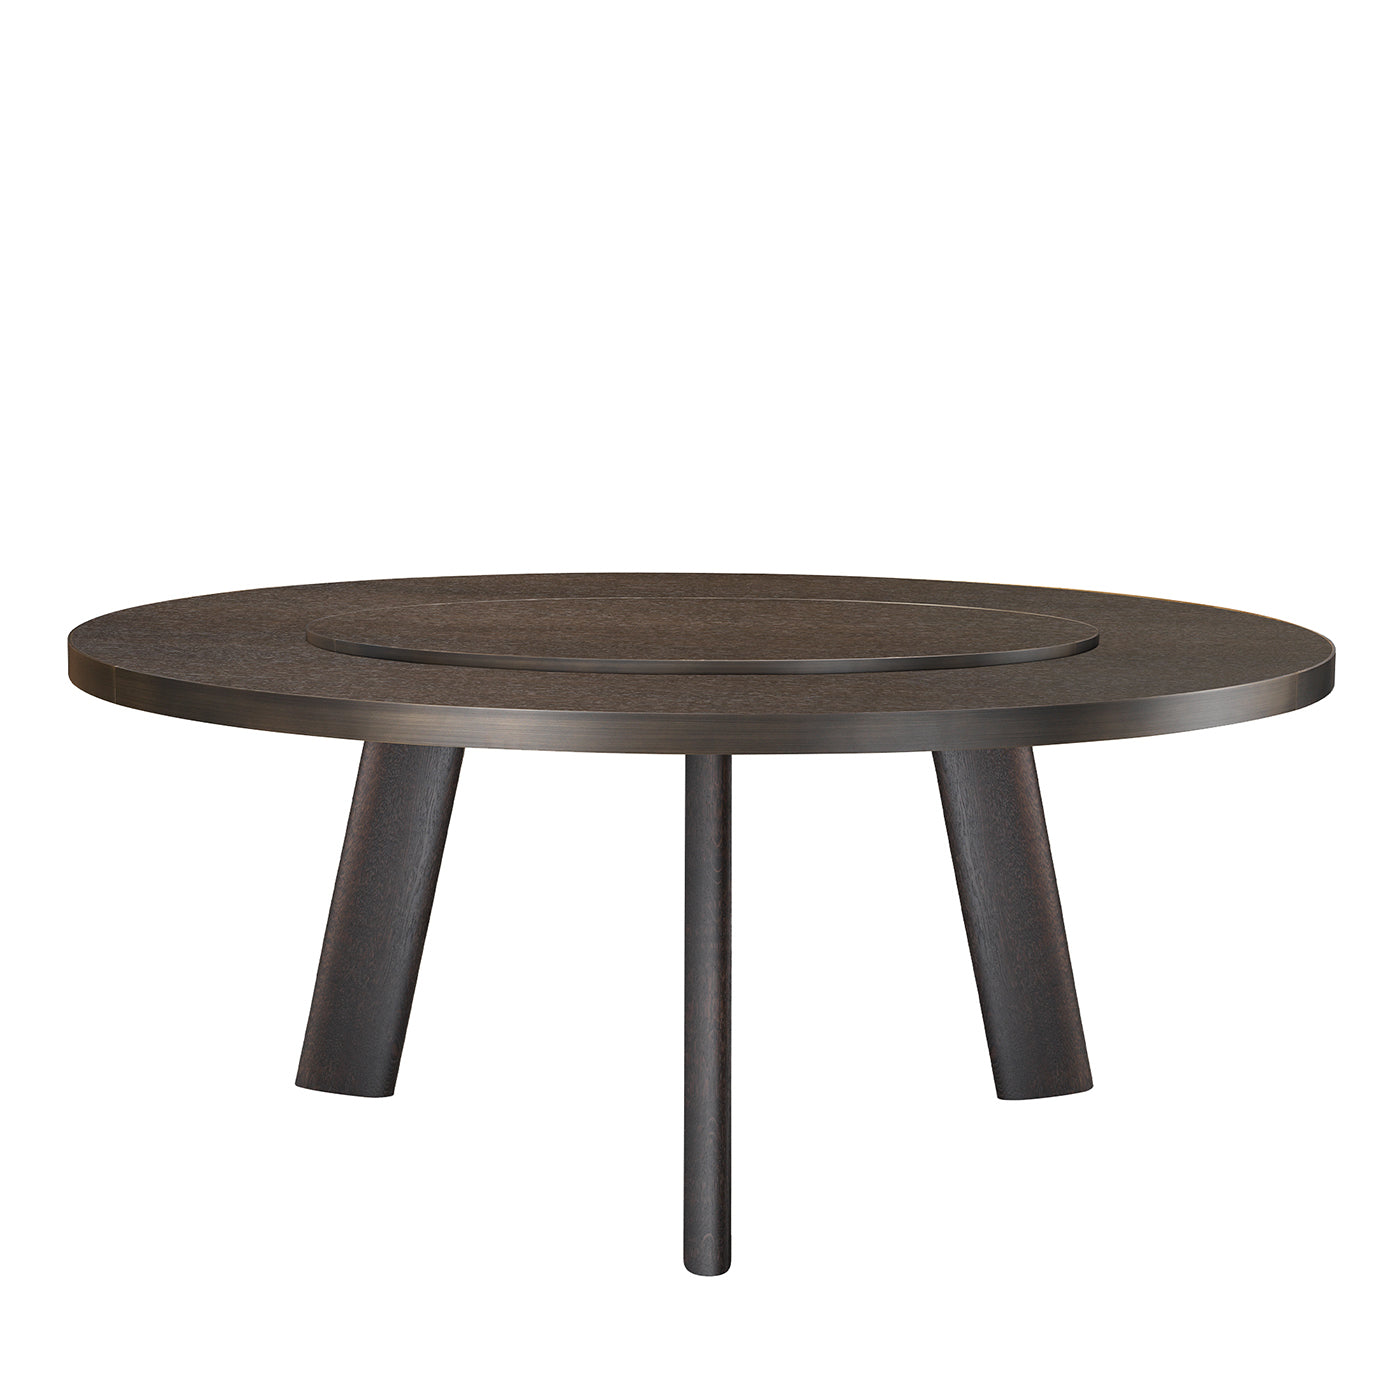 Native Round Brown Table by Stefano Giovannoni - Main view